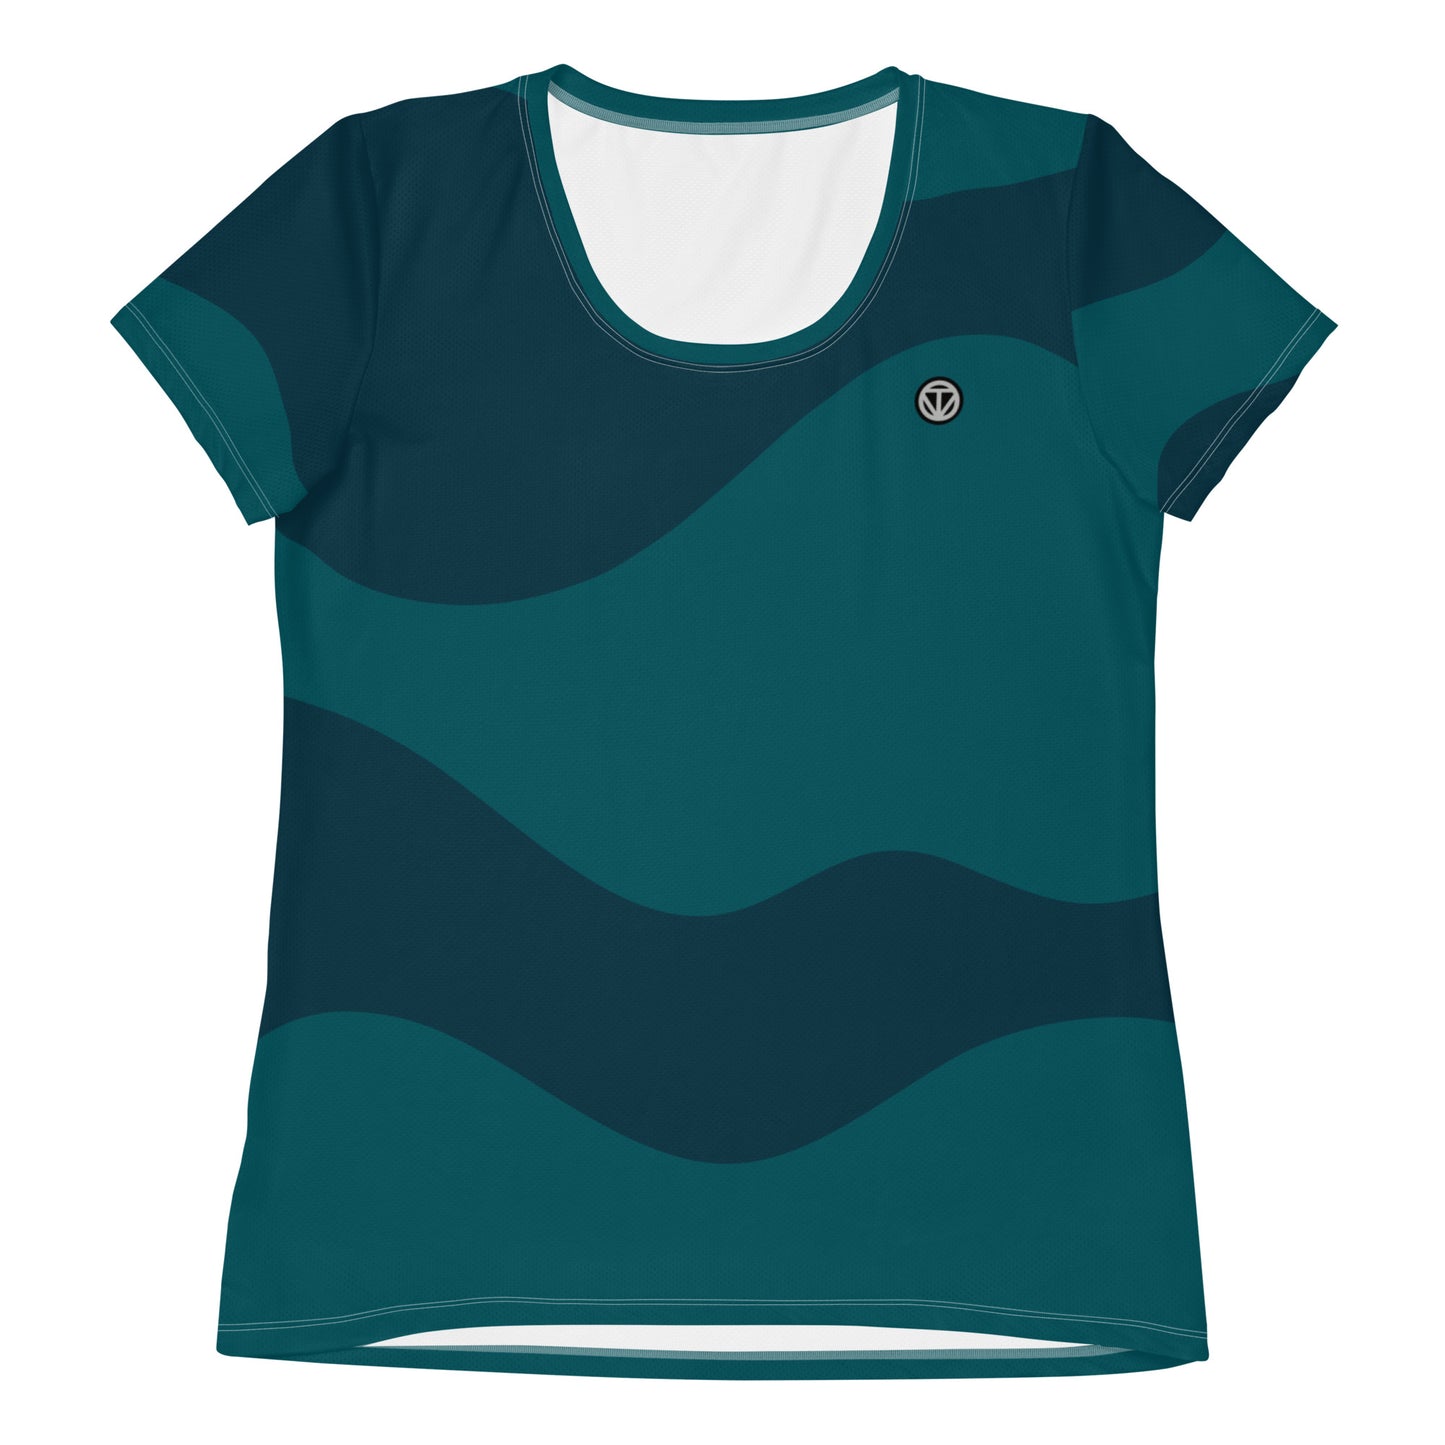 TIME OF VIBES - Women's Athletic T-shirt ABSTRACT (Sherpa Blue) - €45.00